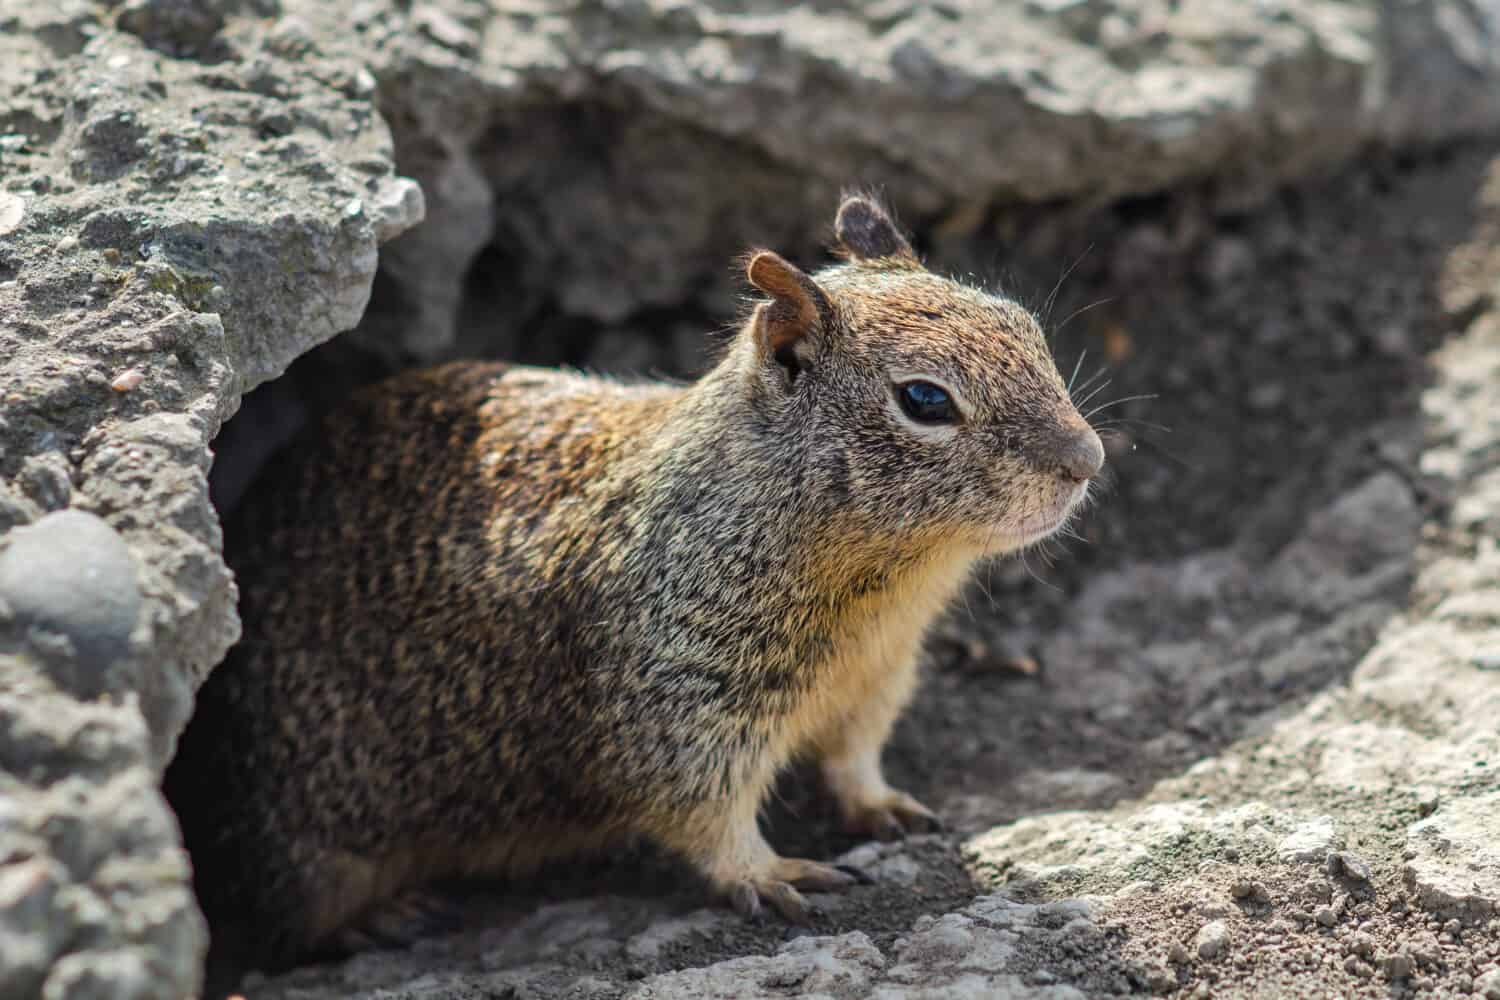 A California ground squirrel stands outside of her nest - known as a burrow - and appears to look at the camera.